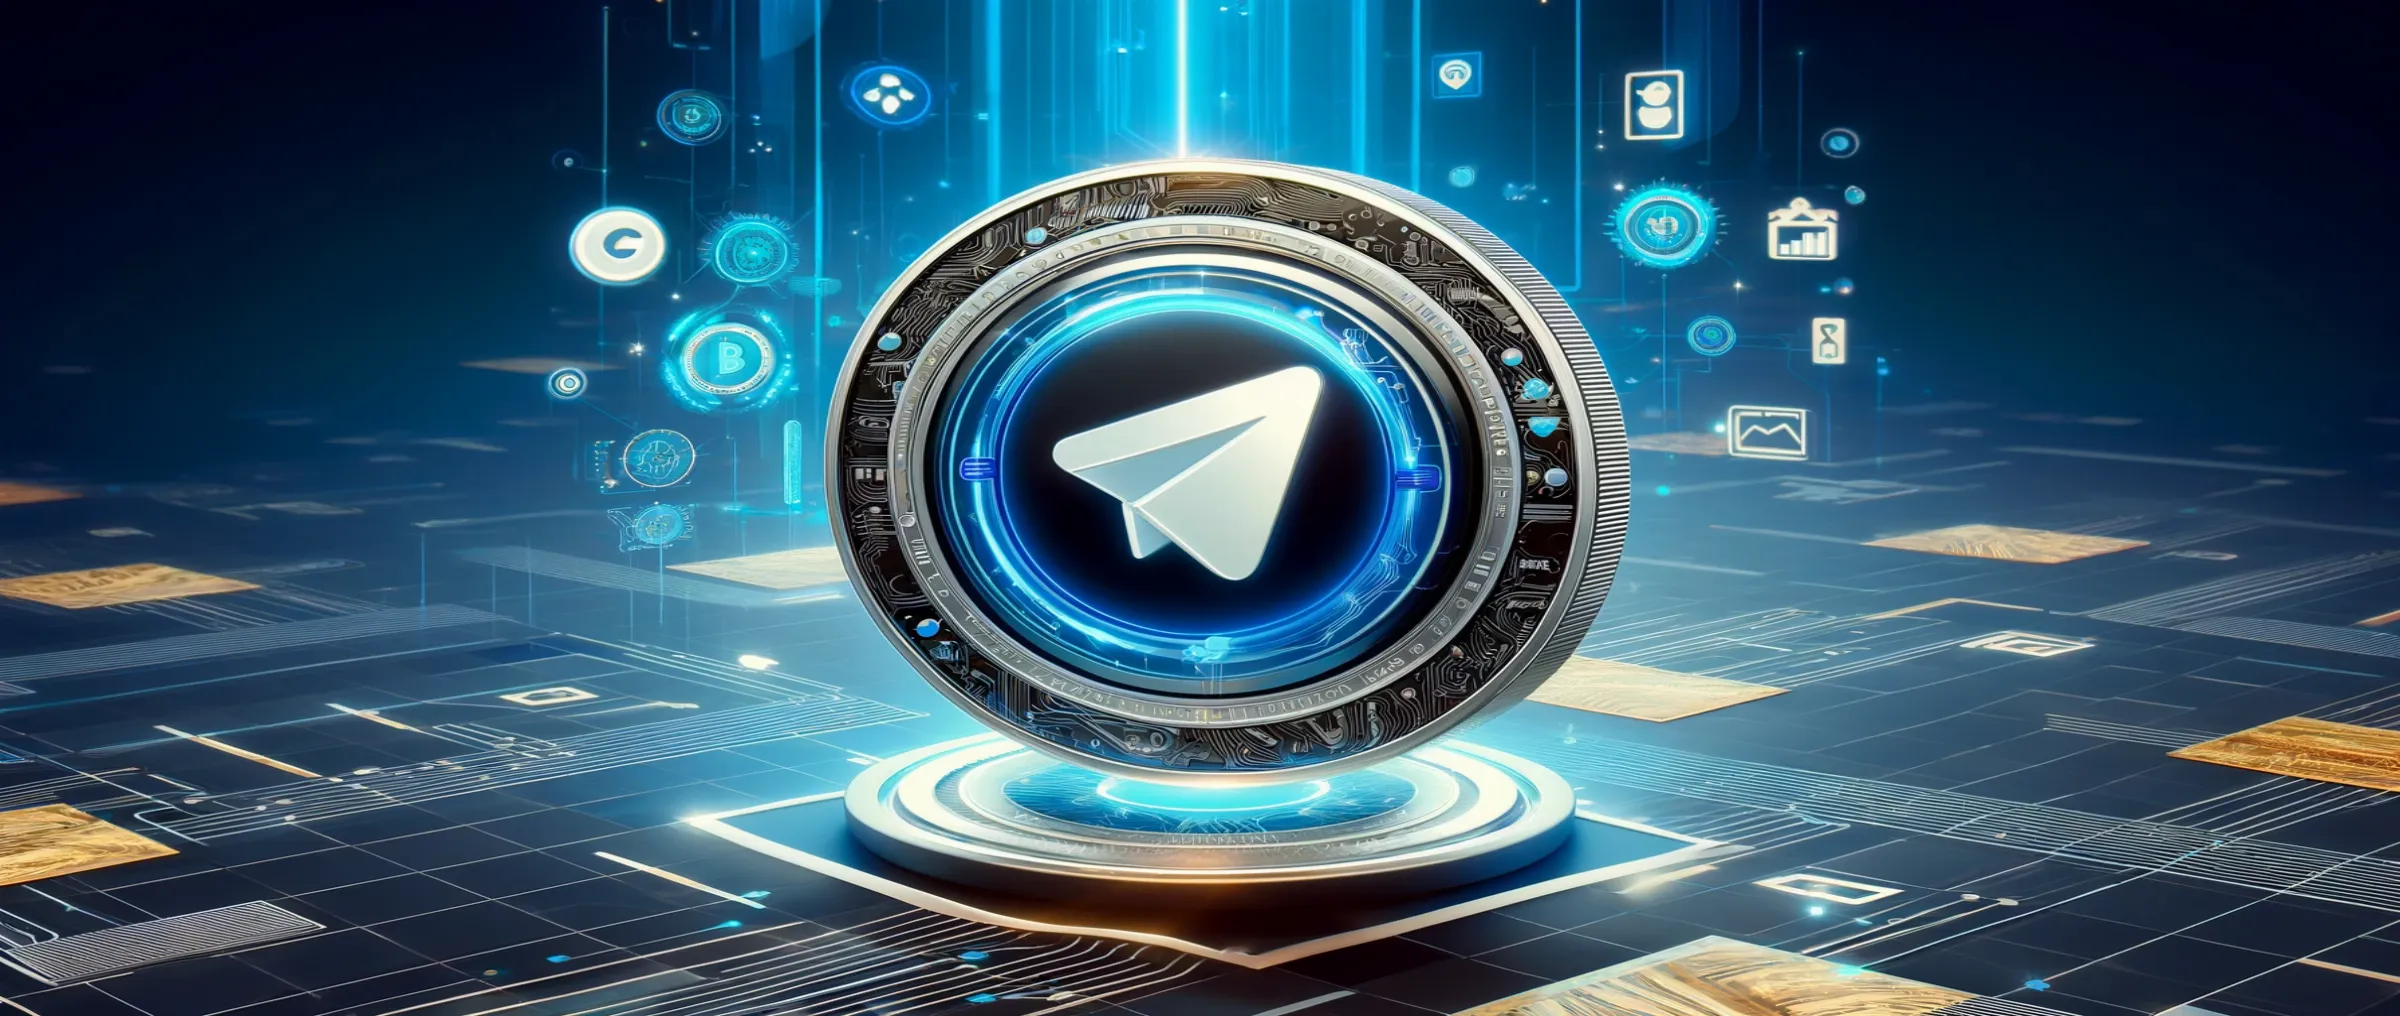 Telegram will release its own currency on the TON platform